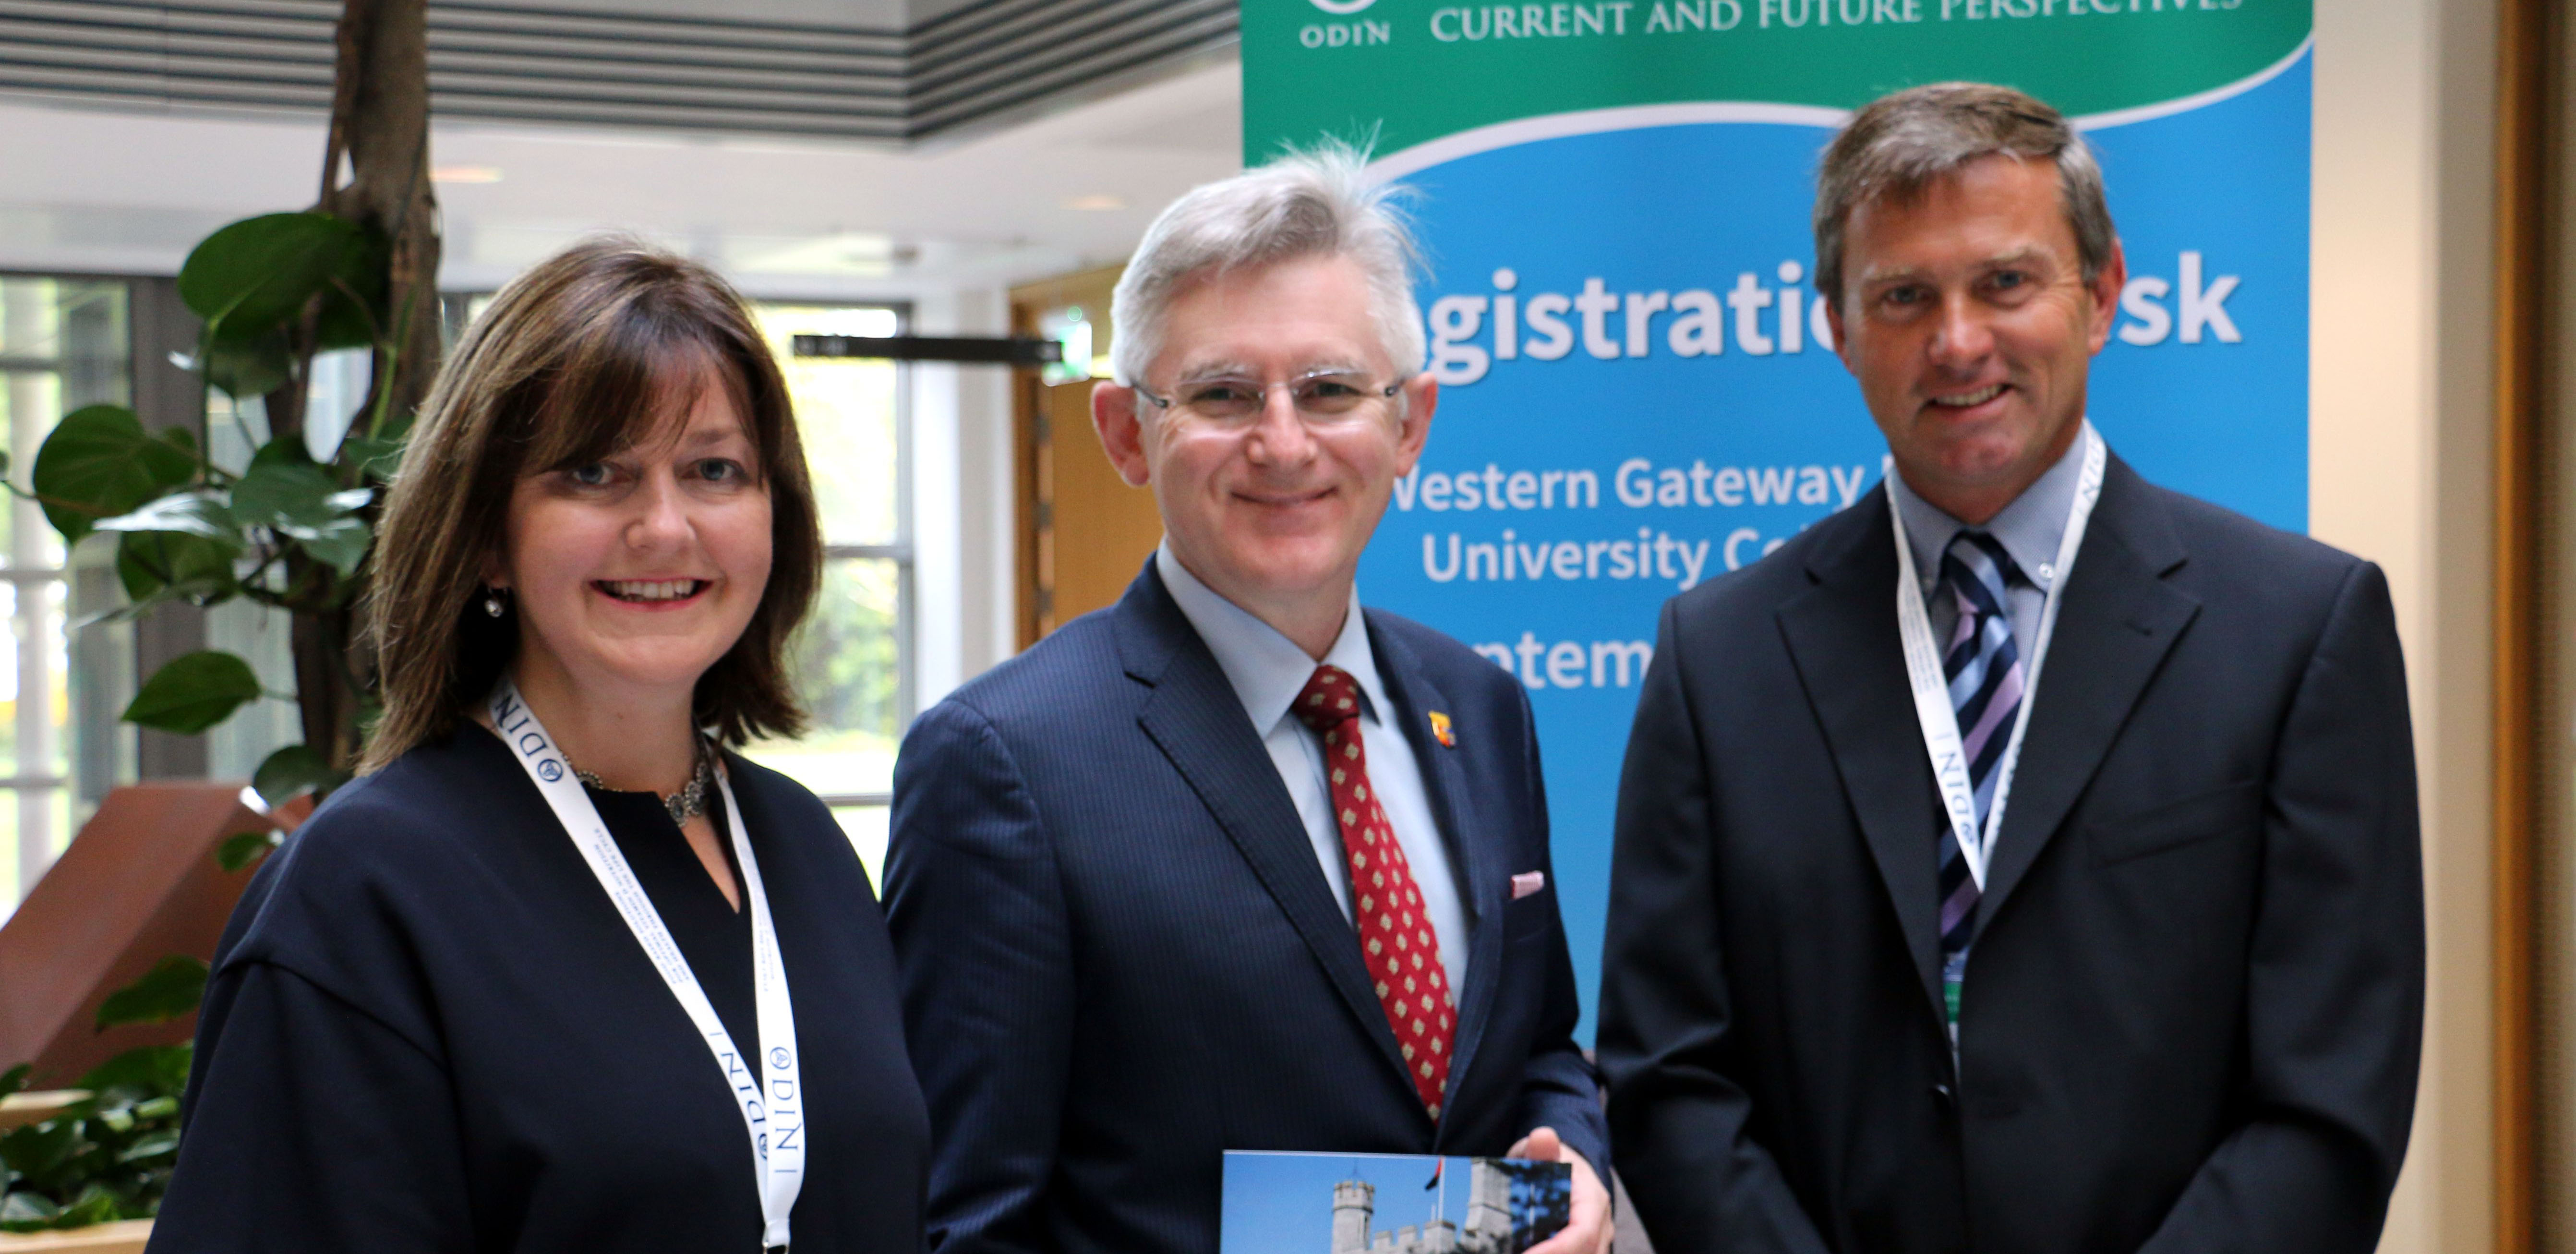 The School’s Cork Centre for Vitamin D and Nutrition Research hosts international scientific conference on Vitamin D and Health in Europe at University College Cork